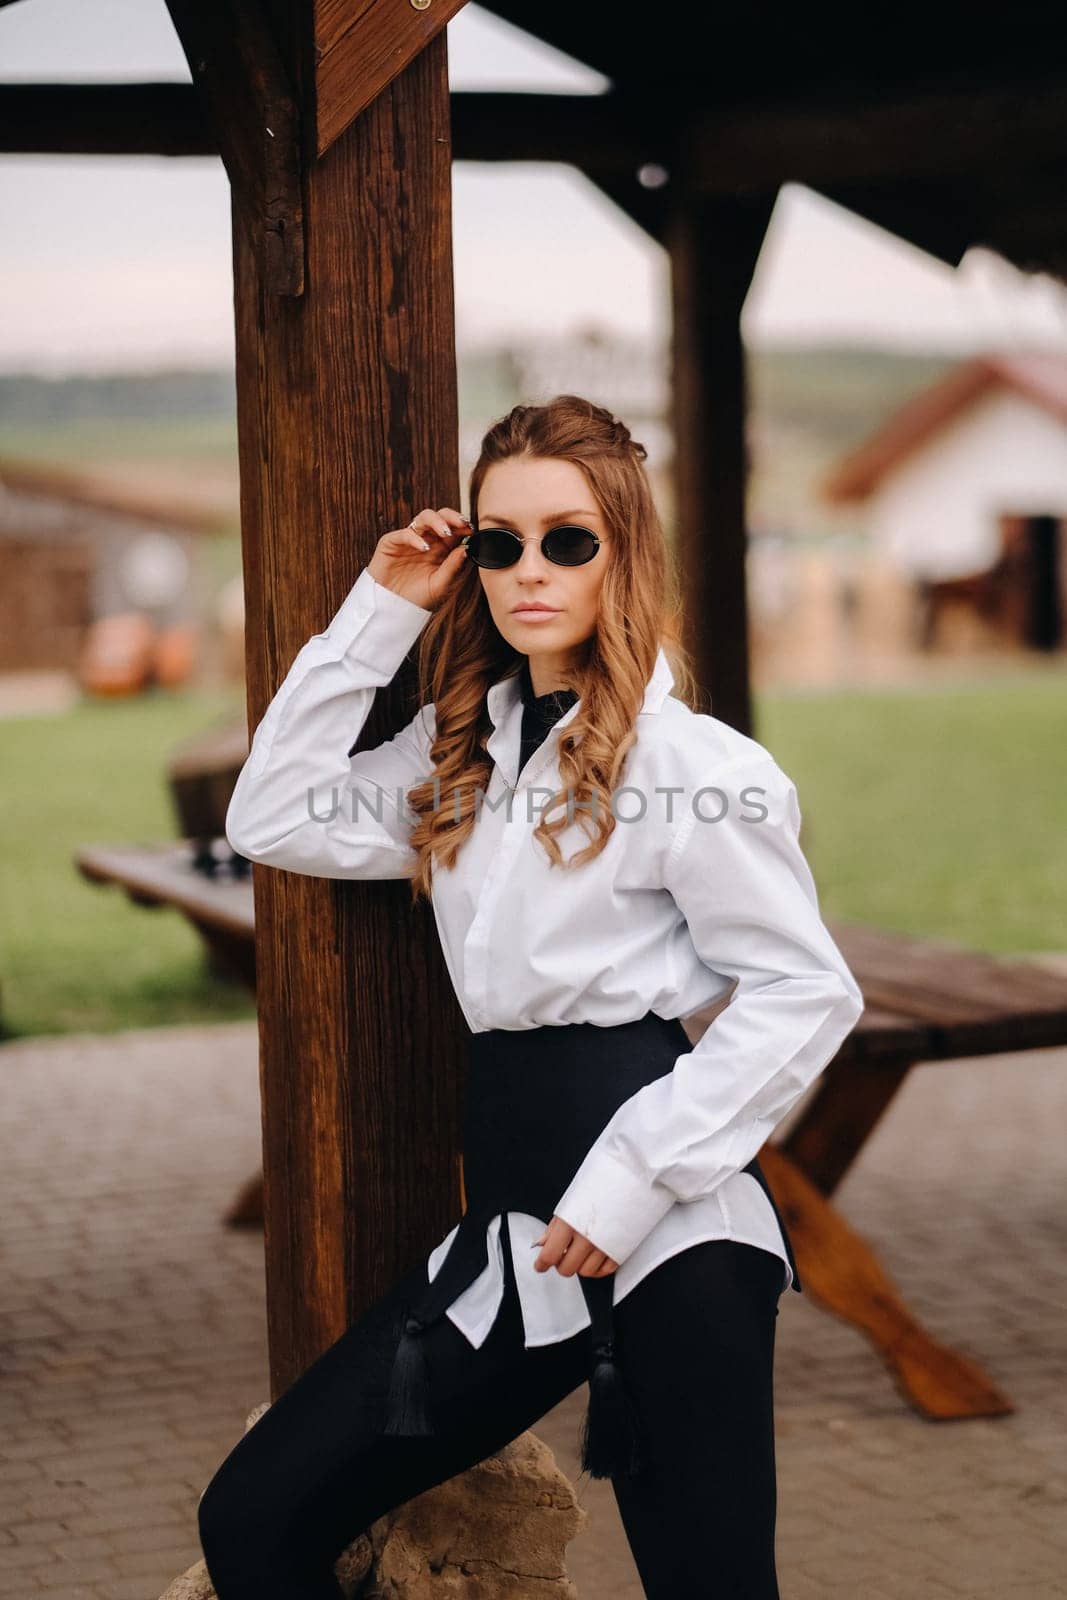 A stylish girl in a white shirt and sunglasses standing on the street during the day by Lobachad